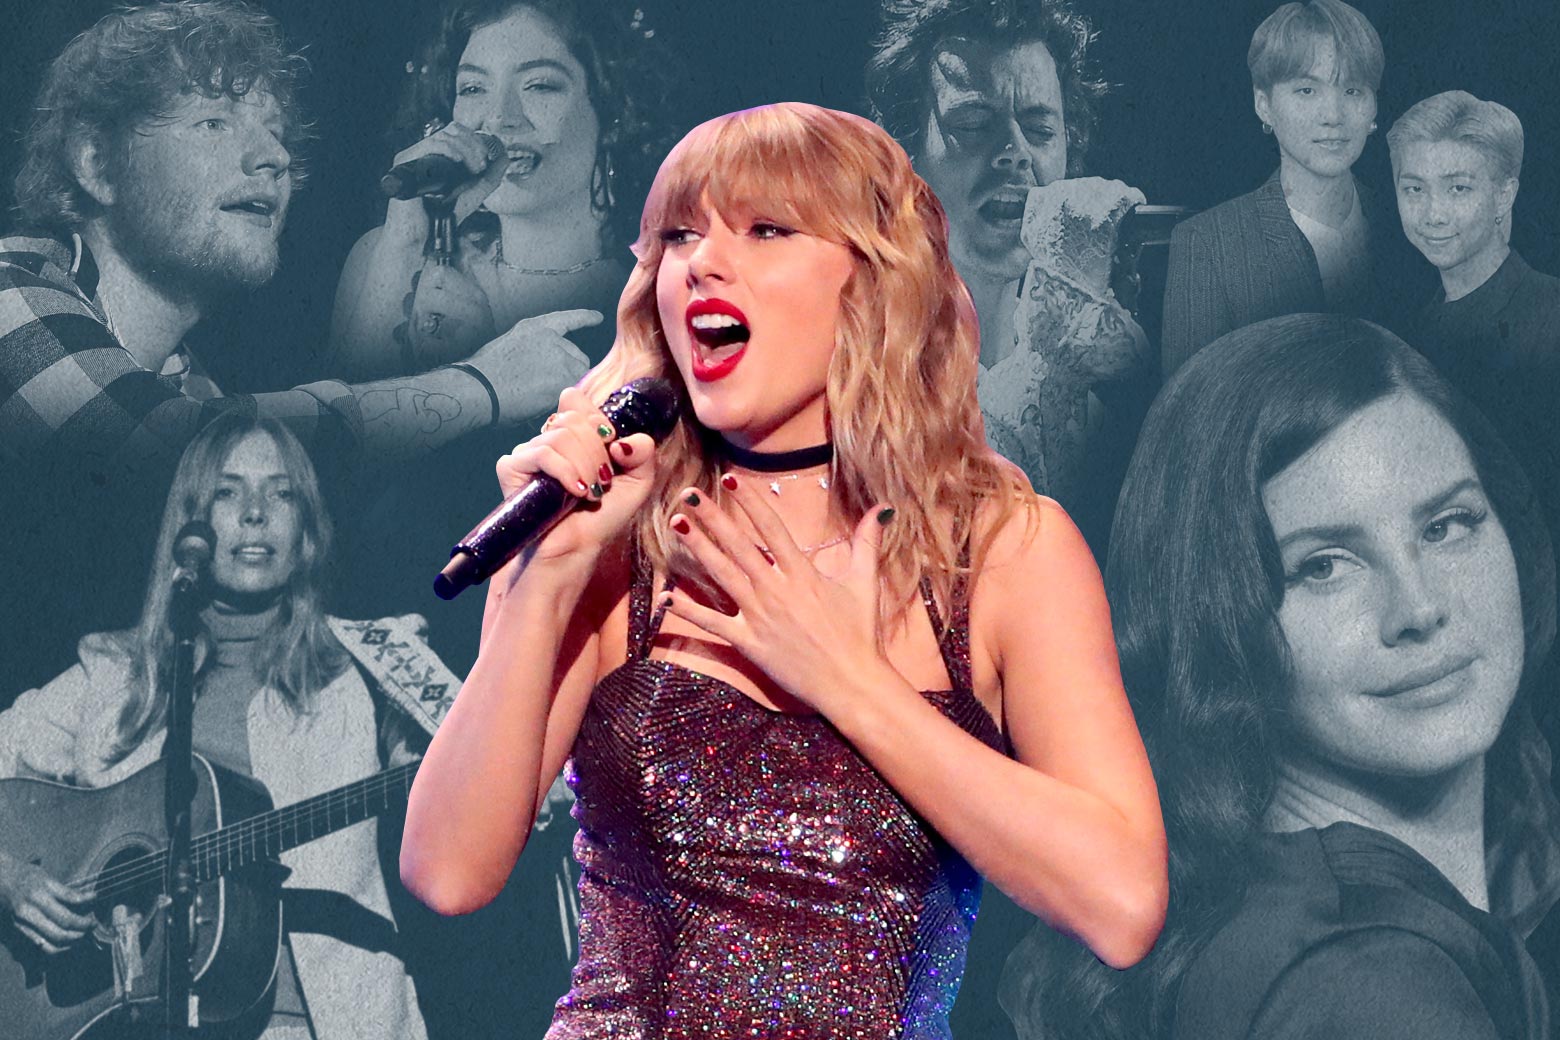 Cutout of Taylor Swift singing into a microphone, surrounded by a collage that includes Ed Sheeran, Lorde, Harry Styles, BTS's RM and Suga, Lana Del Rey, and Joni Mitchell. 